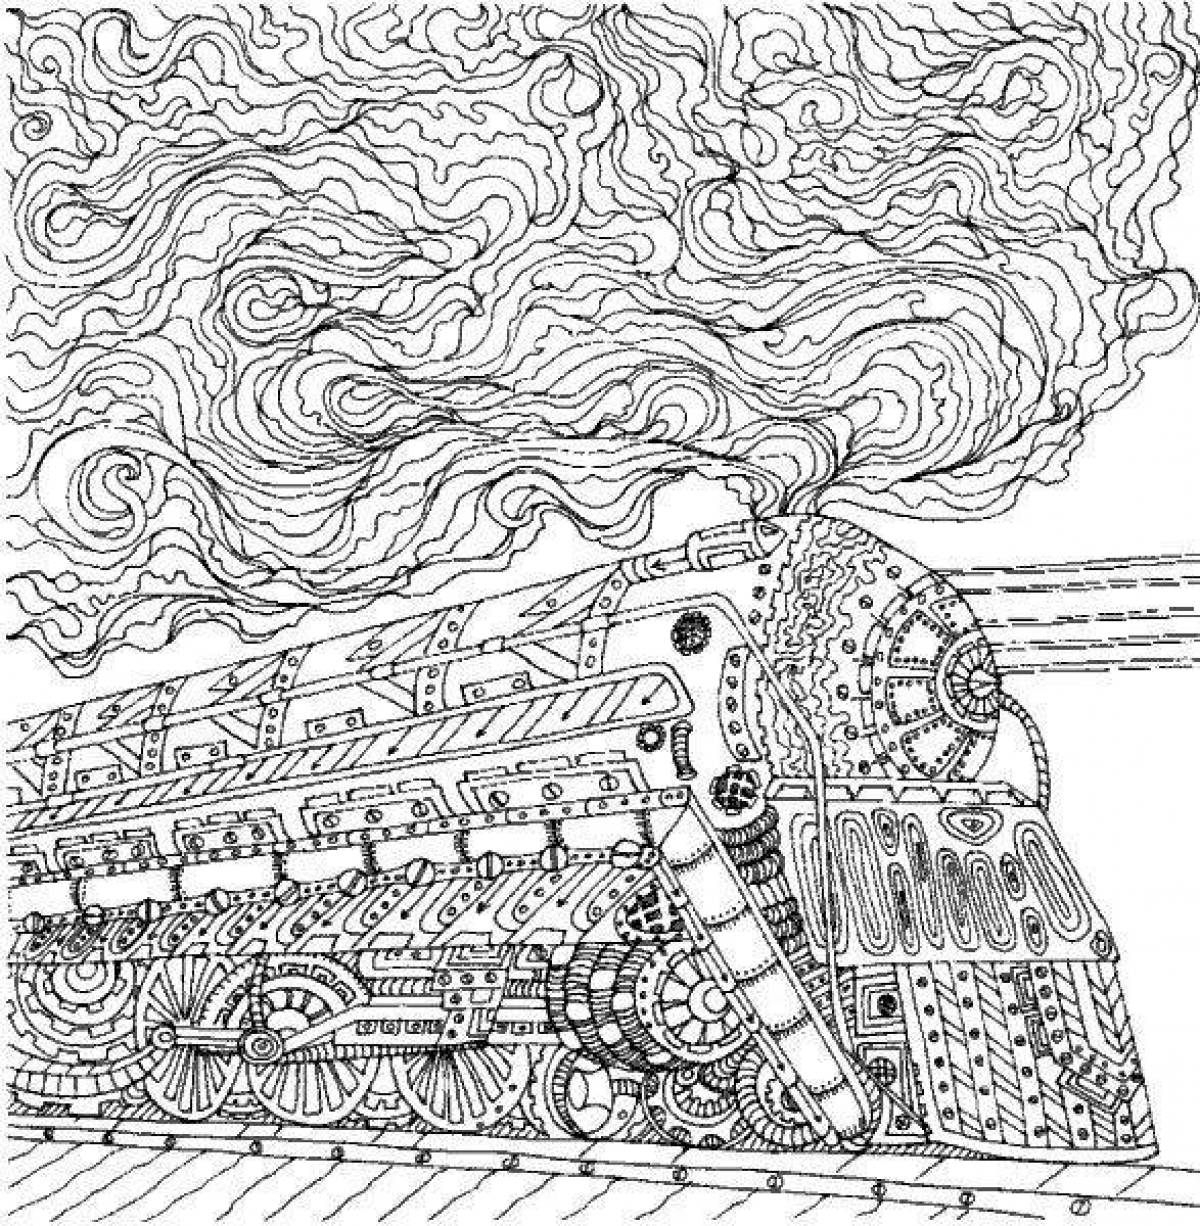 Amazingly detailed coloring book